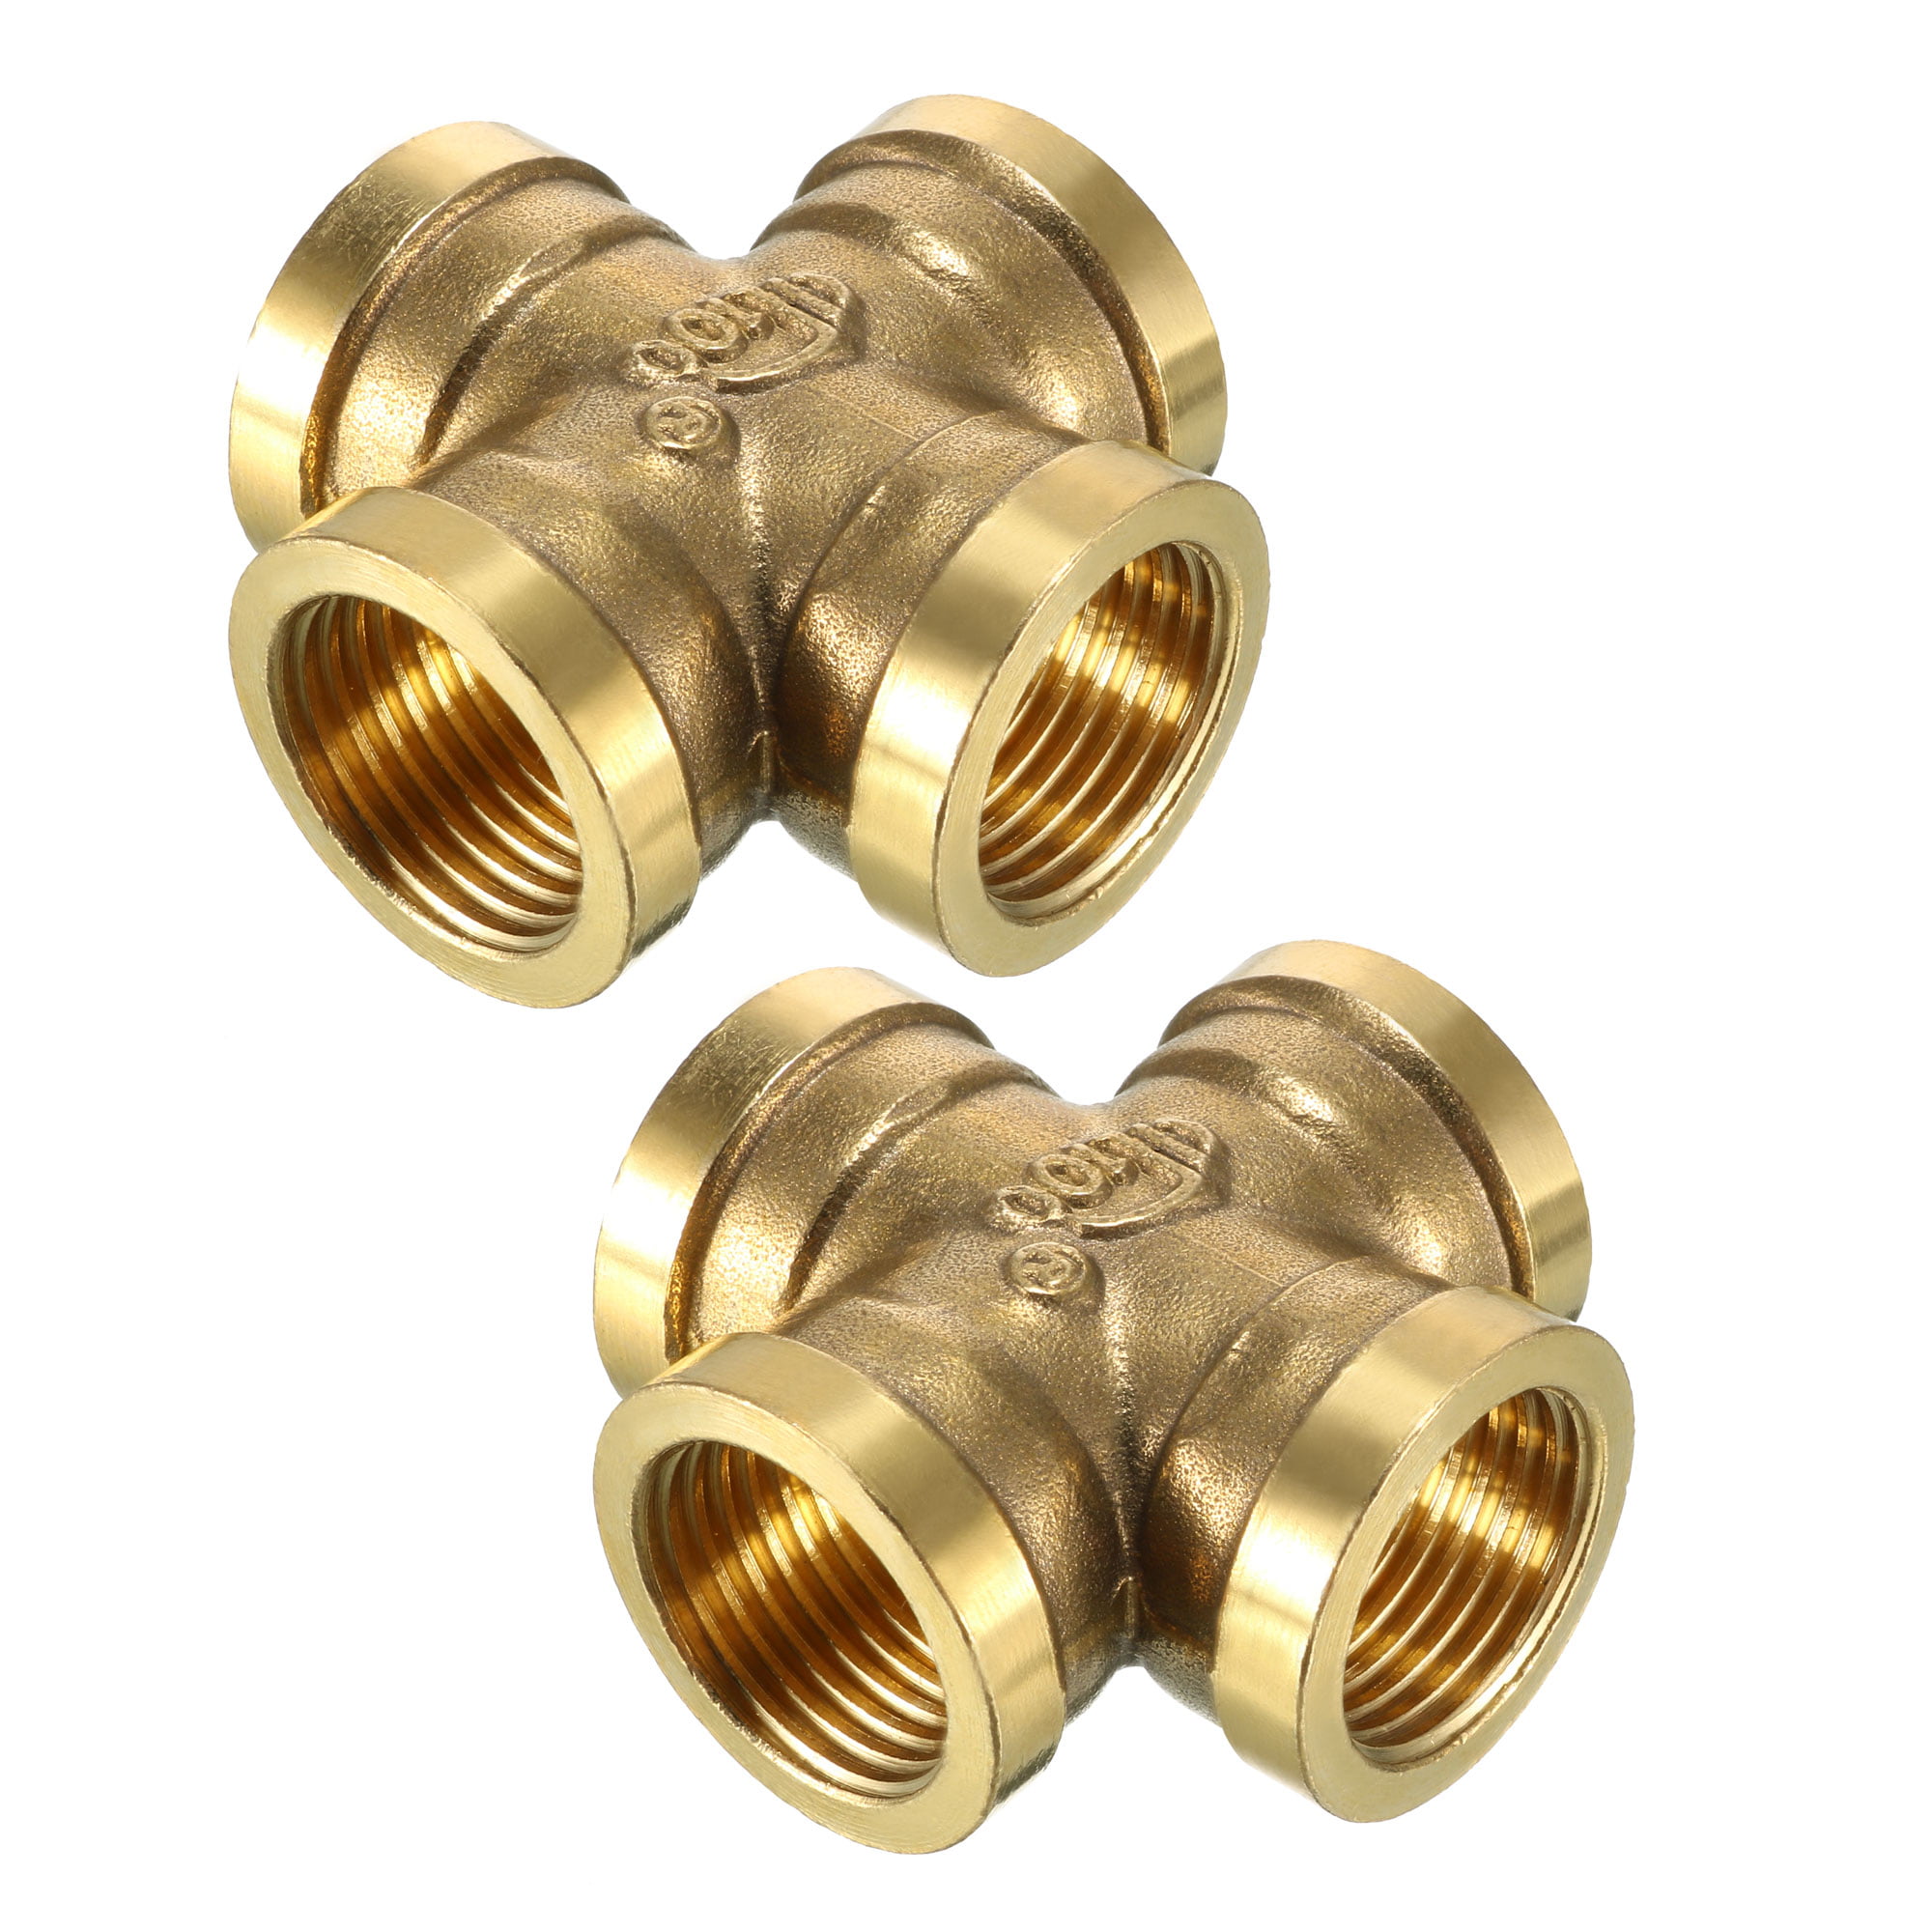 Brass BSP X Shape EqualFemale Thread4-way Connector Pipe Fittings Tubing 